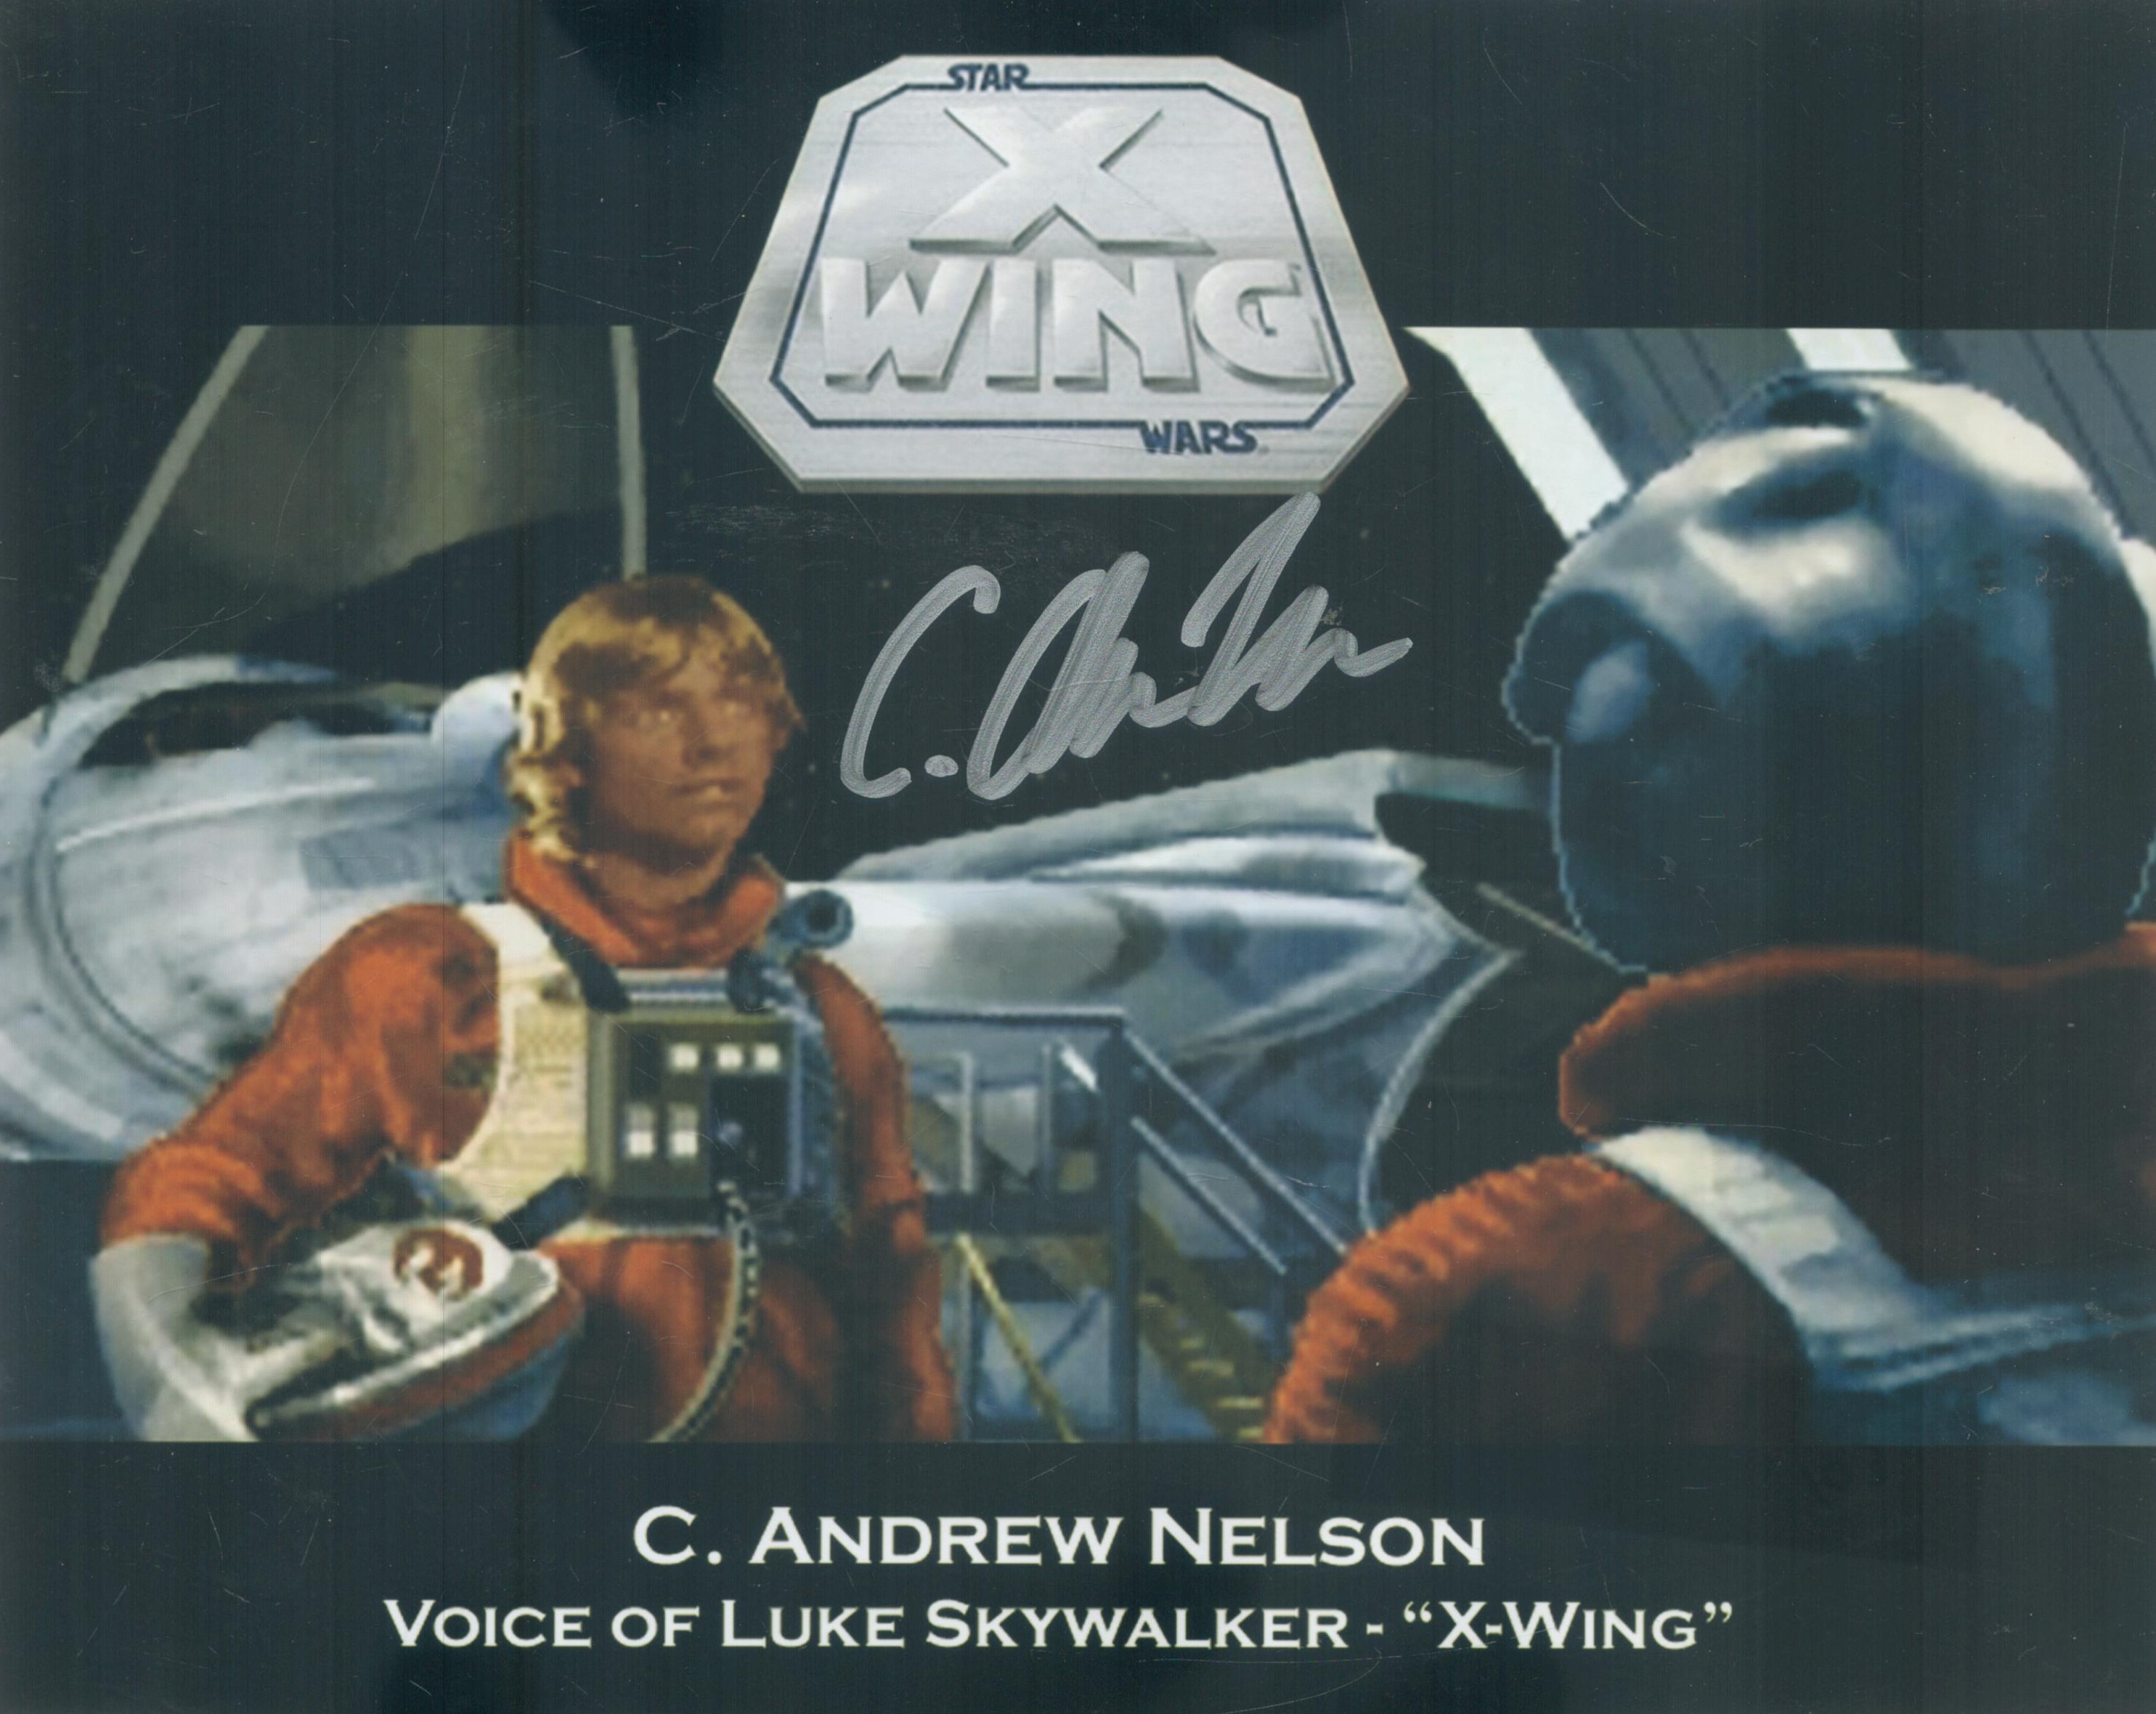 Star Wars X-Wing 8 x 10 inch colour photo signed by Luke Skywalker voice C Andrew Nelson. Nelson